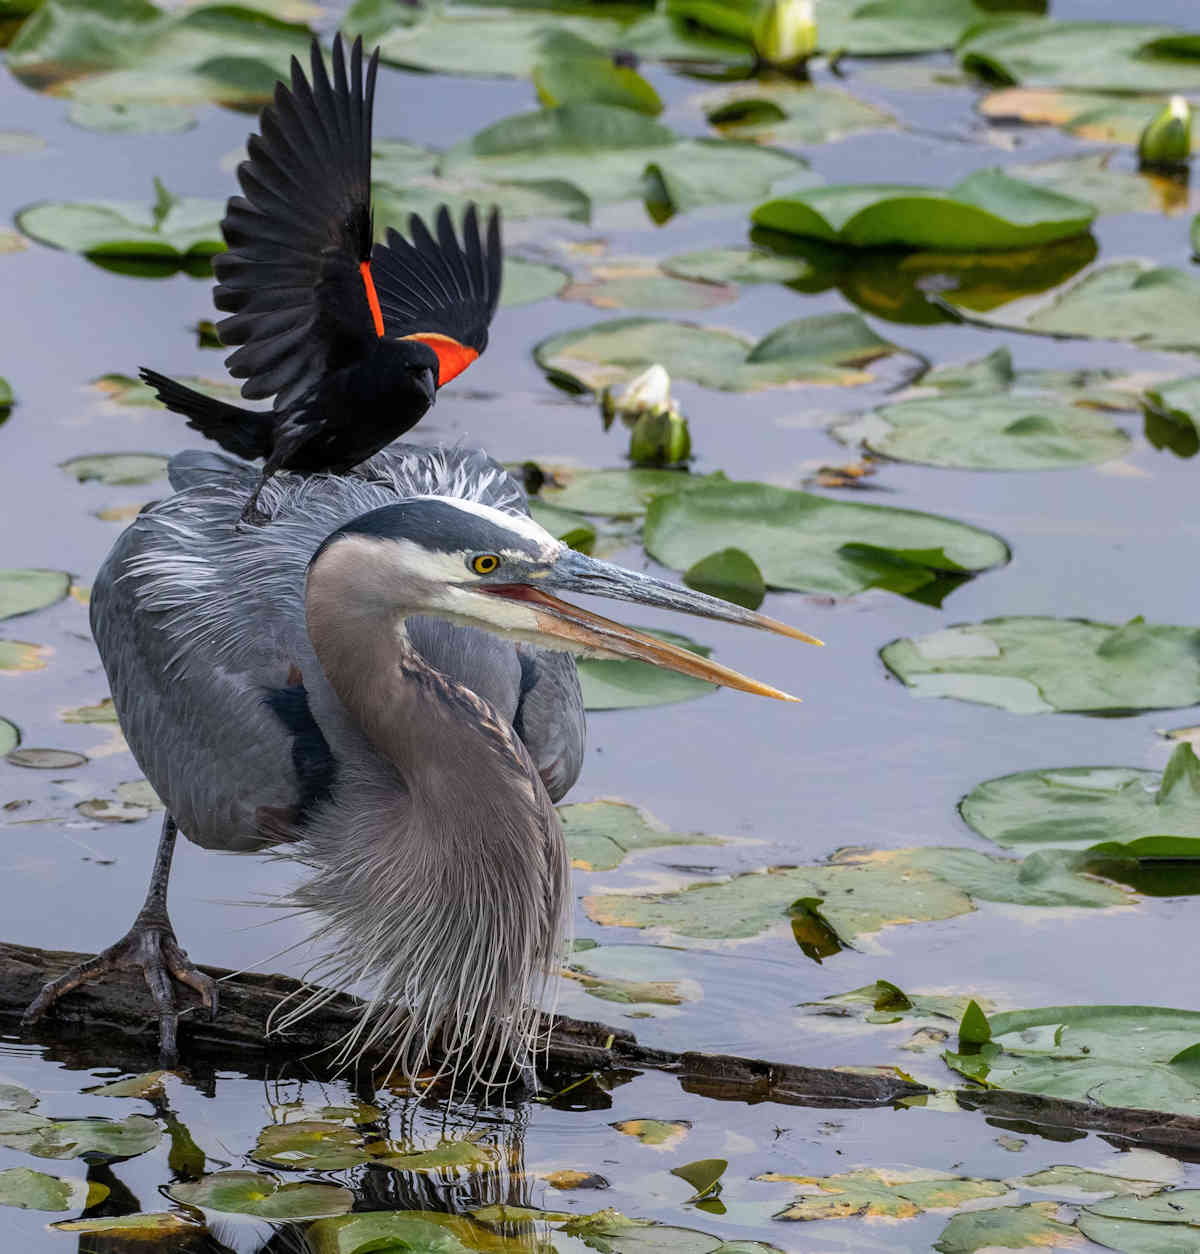 A Red-winged Blackbird lands on a Great Blue Heron in the water.